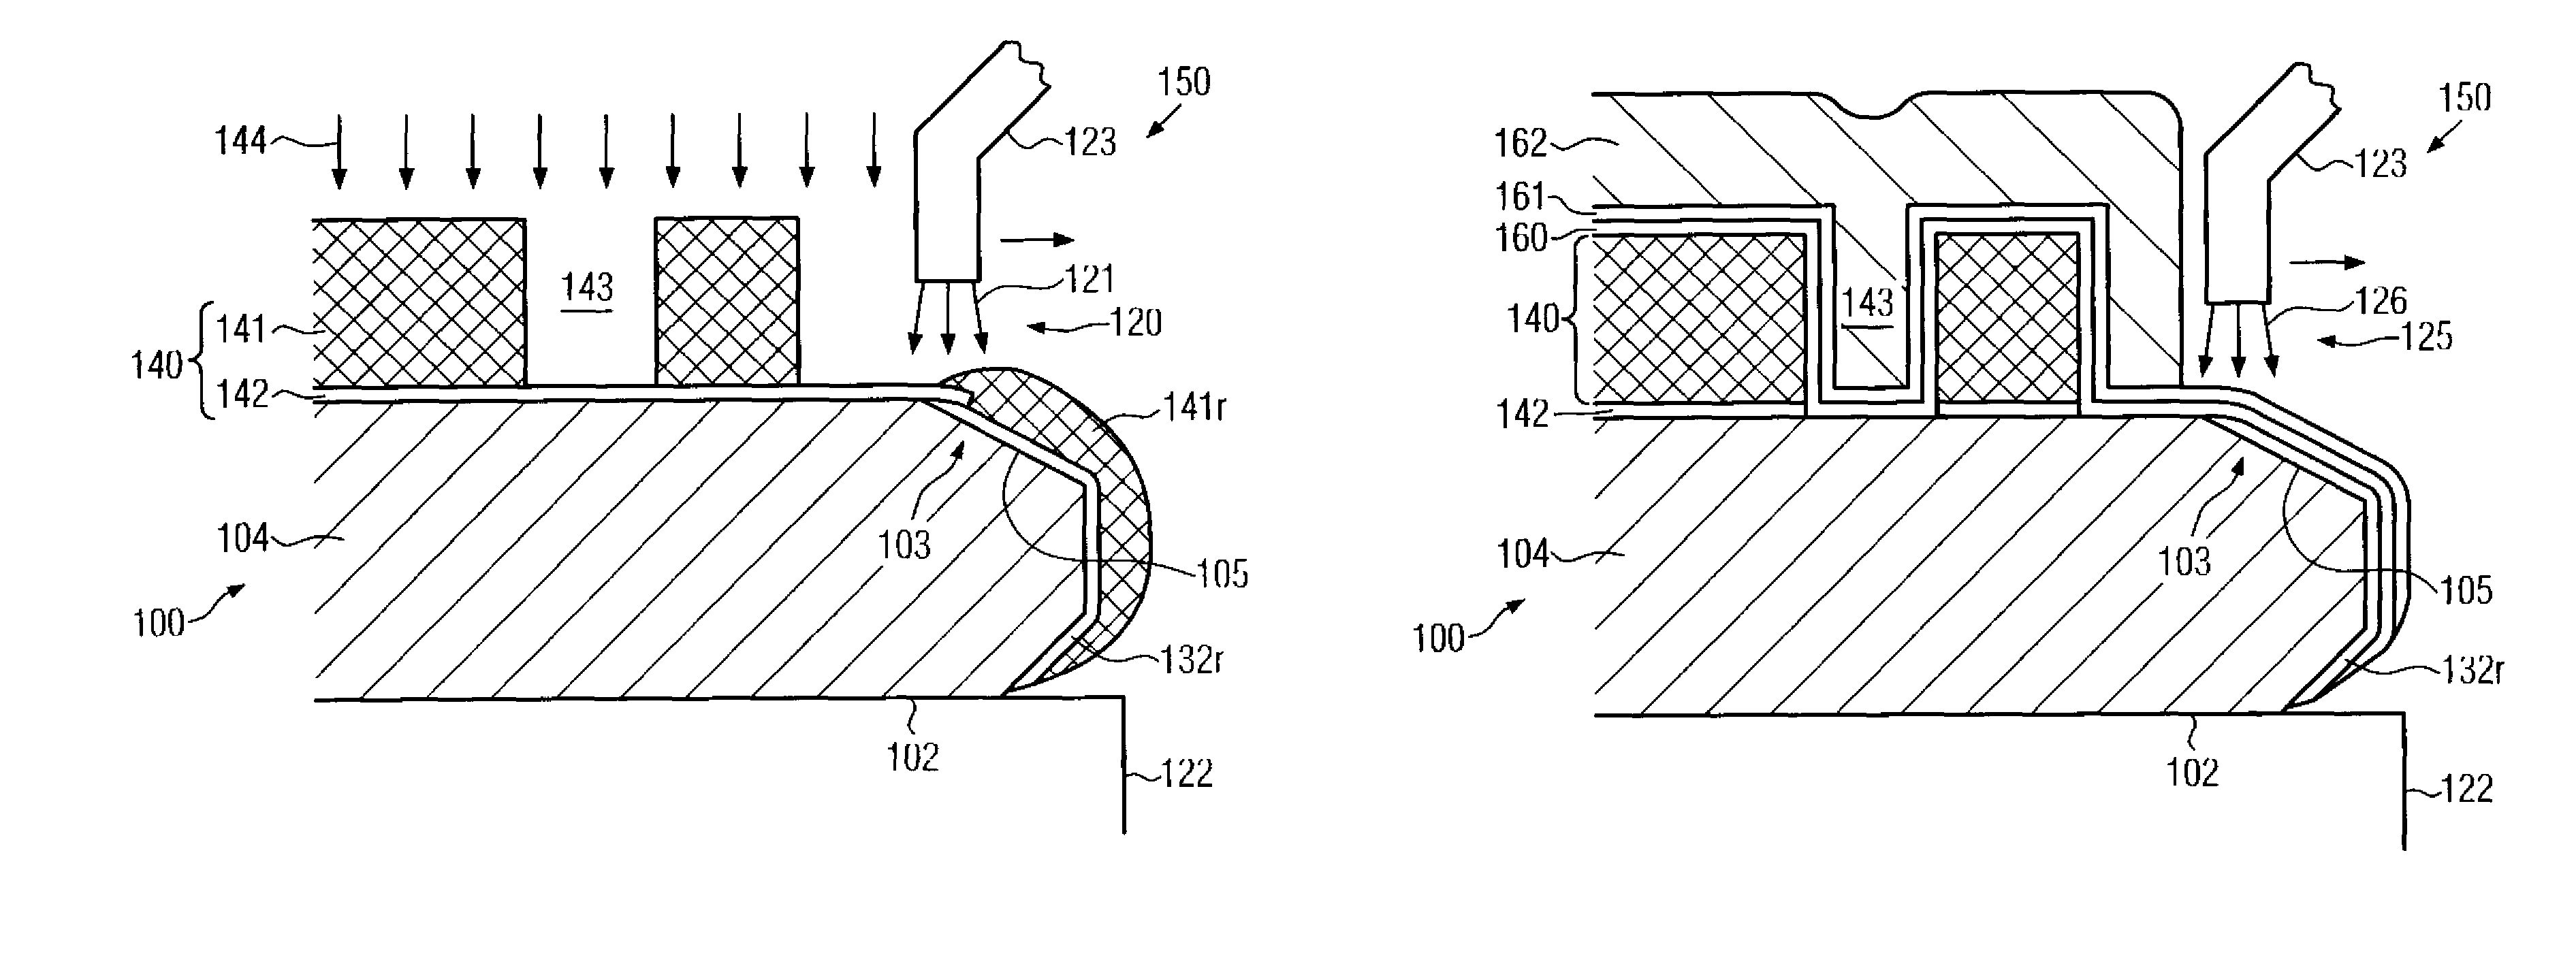 Method of reducing contamination by providing an etch stop layer at the substrate edge